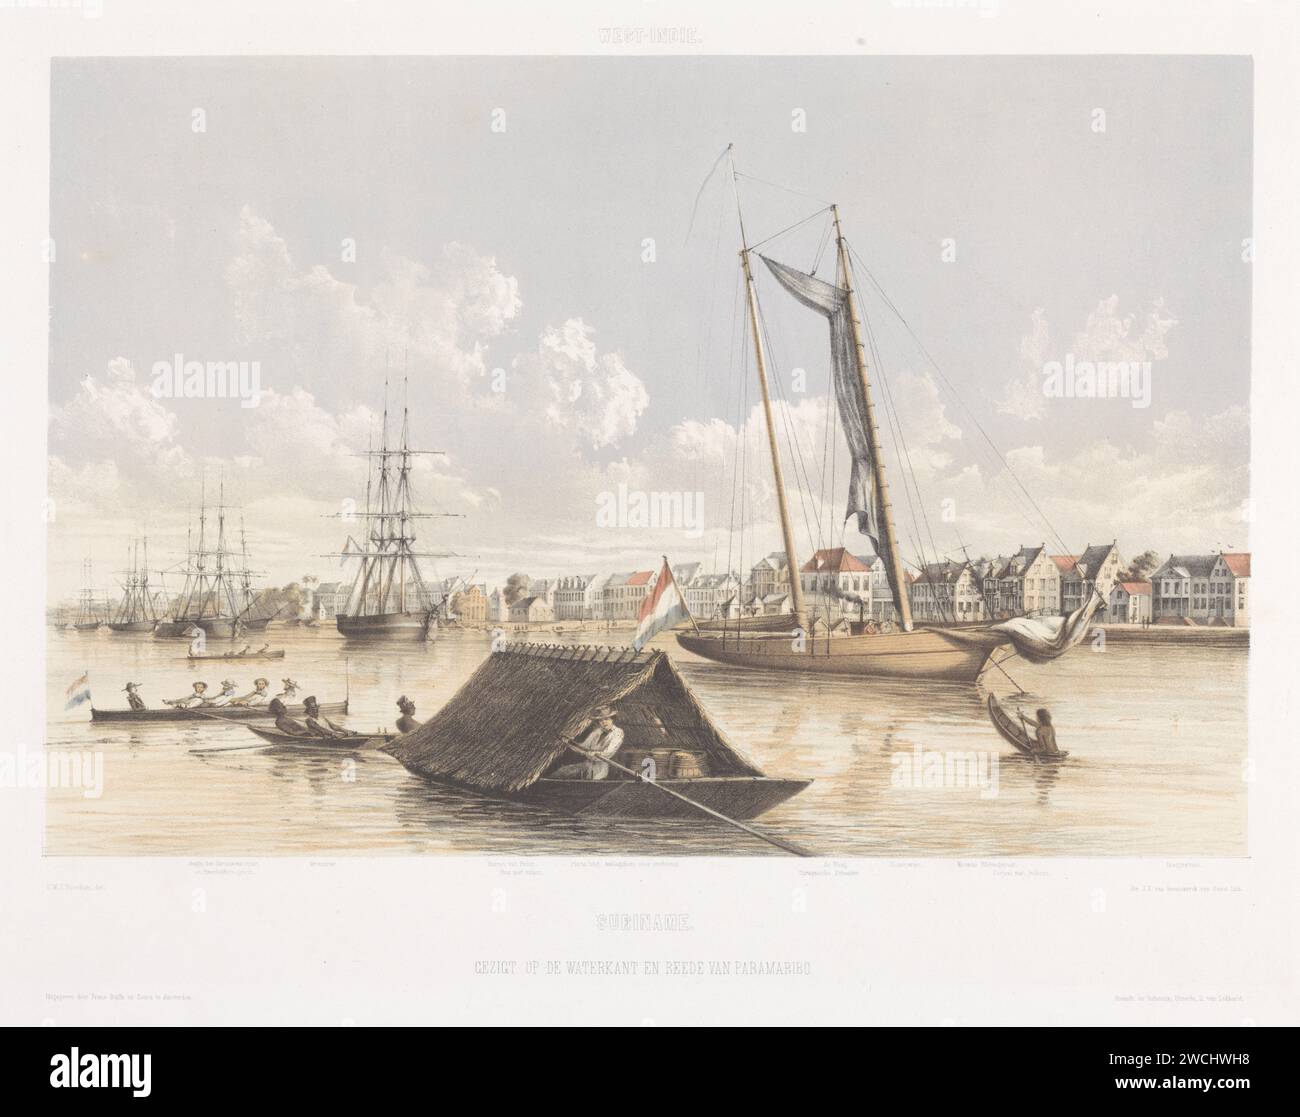 View of the Waterkant and Reede of Paramaribo, Jonkheer Jacob Eduard van Heemskerck van Beest, after Gerard Voorduin, 1860 - 1862 print Various boats sail on the river, including a few rowing boats. In the front, a pondo sails with a thatched roof with which barrels are transported. Behind it a Curaçao schooner with the Dutch flag. On the quay buildings such as the Waag with a red roof. Street names are displayed under the image, at their place on the quay. print maker: Netherlandsprinter: Utrechtpublisher: Amsterdam paper  river Suriname Stock Photo